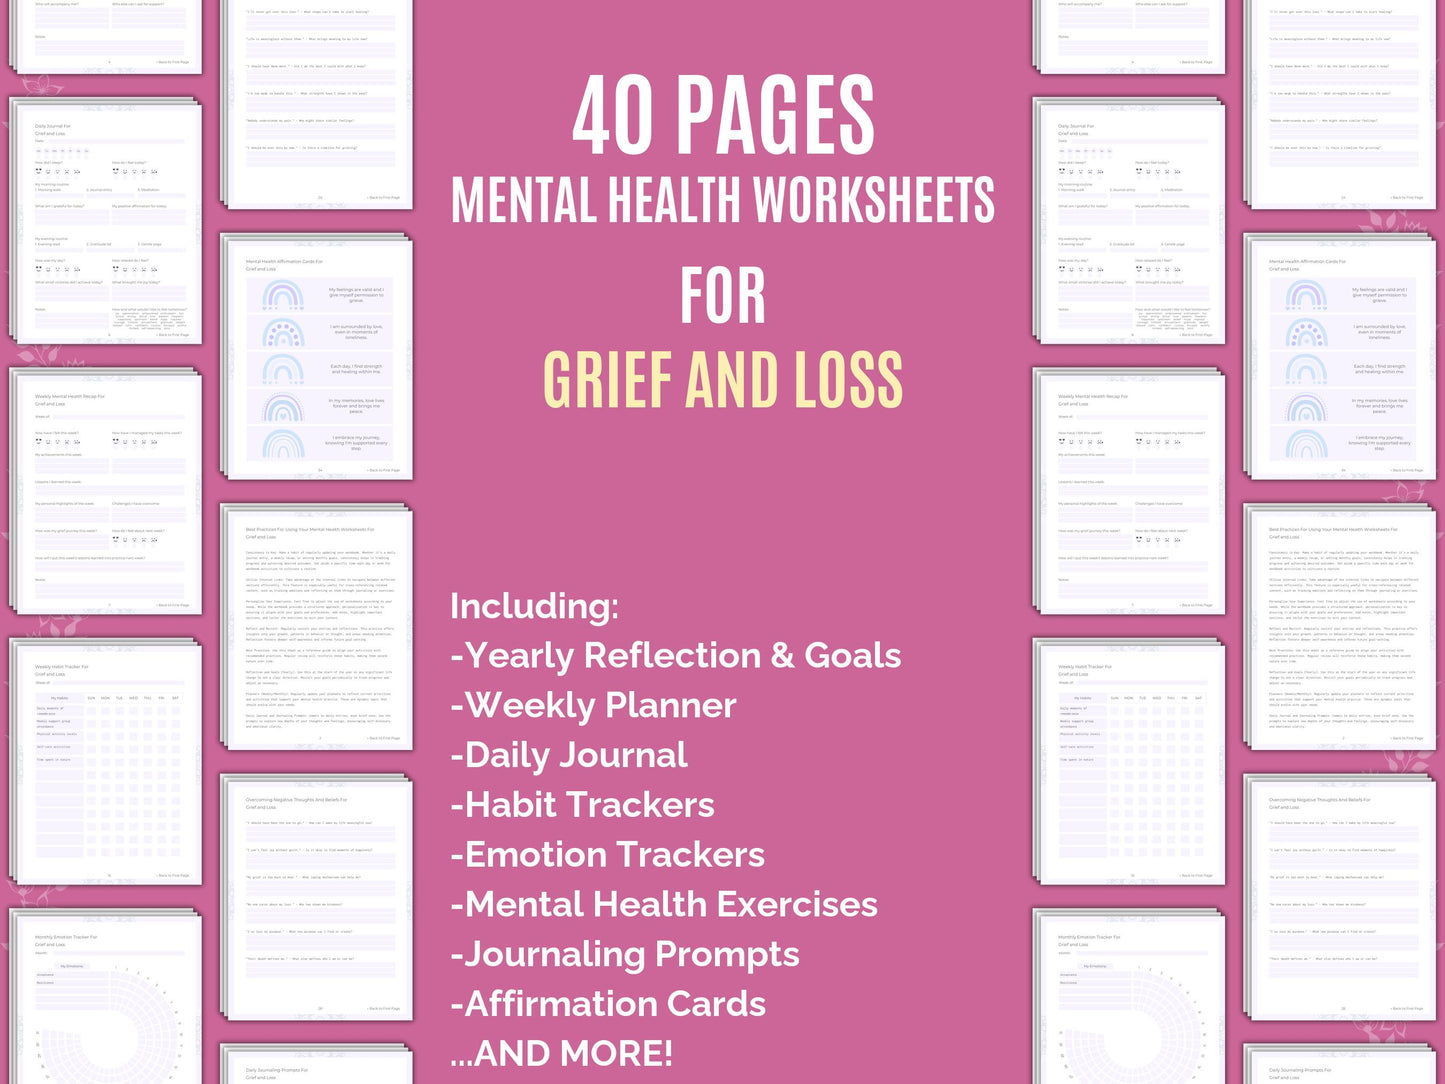 Grief Planners, Grief Counseling, Grief Workbooks, Grief Templates, Grief Therapy, Grief Cheat Sheet, Grief Resources, Grief Tools, Grief Notes, Grief Journaling, Grief Mental Health, Grief Journals, Grief Goal Setting, Loss